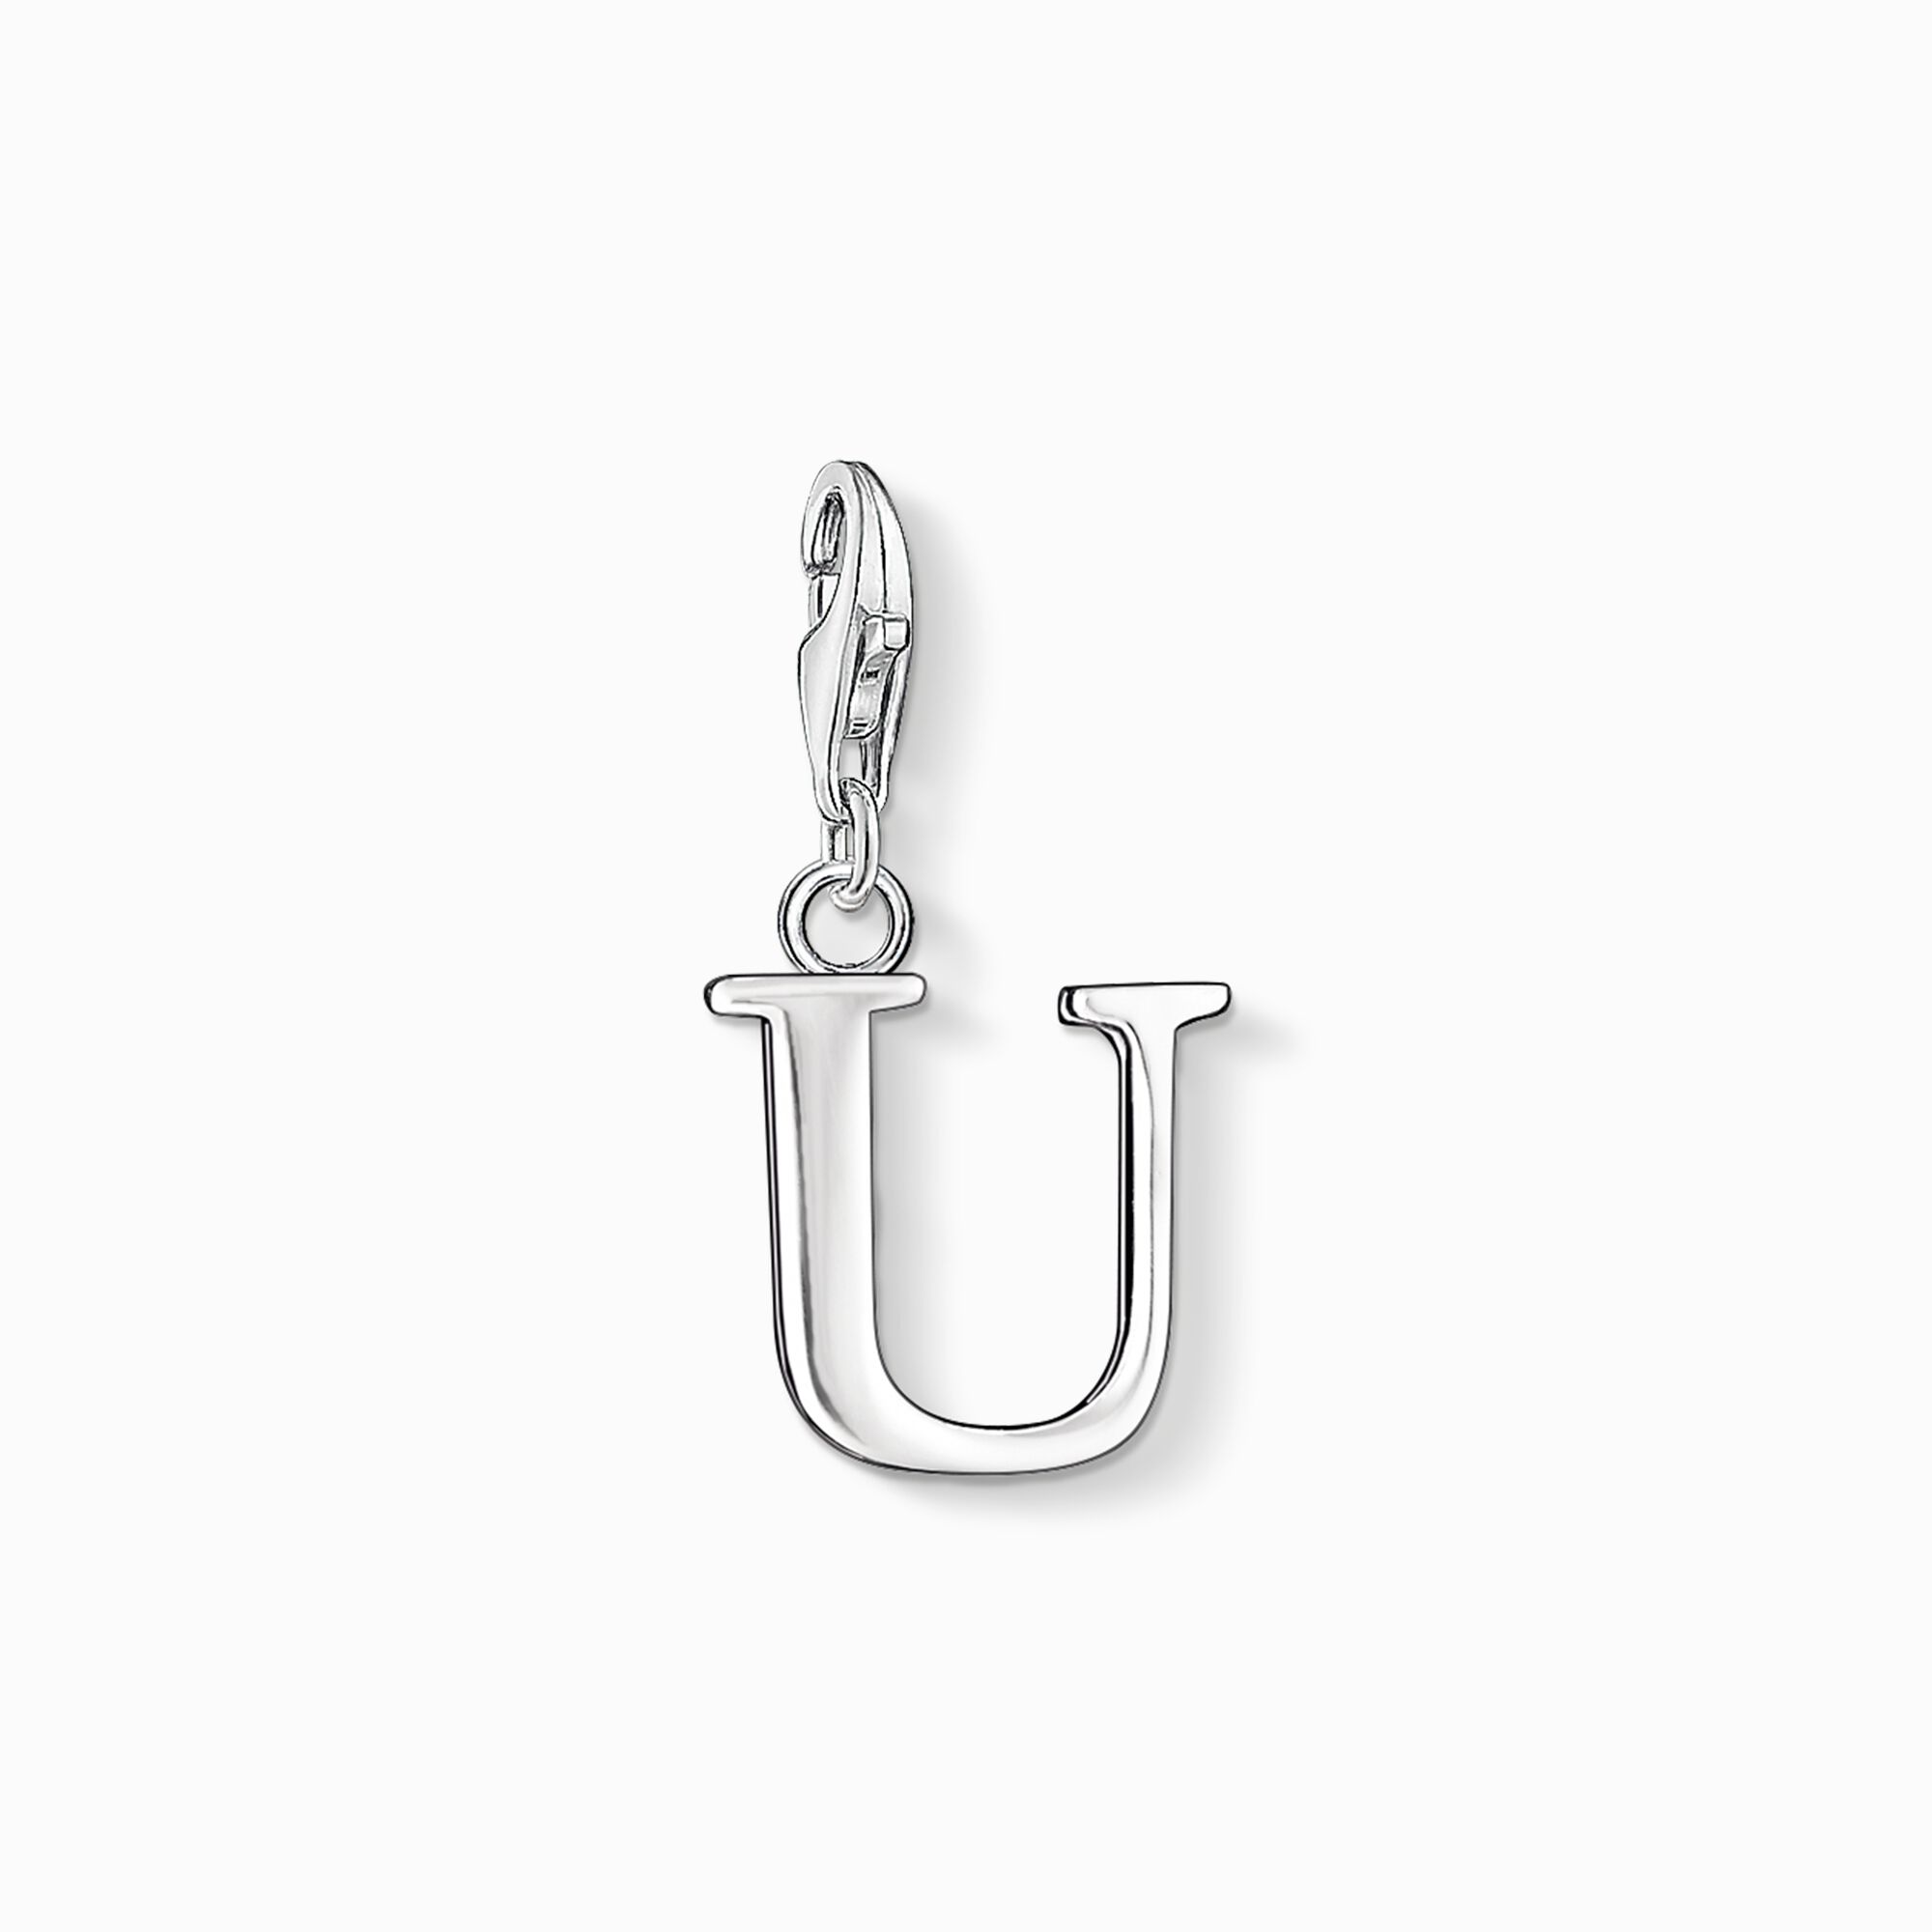 Charm pendant letter U from the Charm Club collection in the THOMAS SABO online store